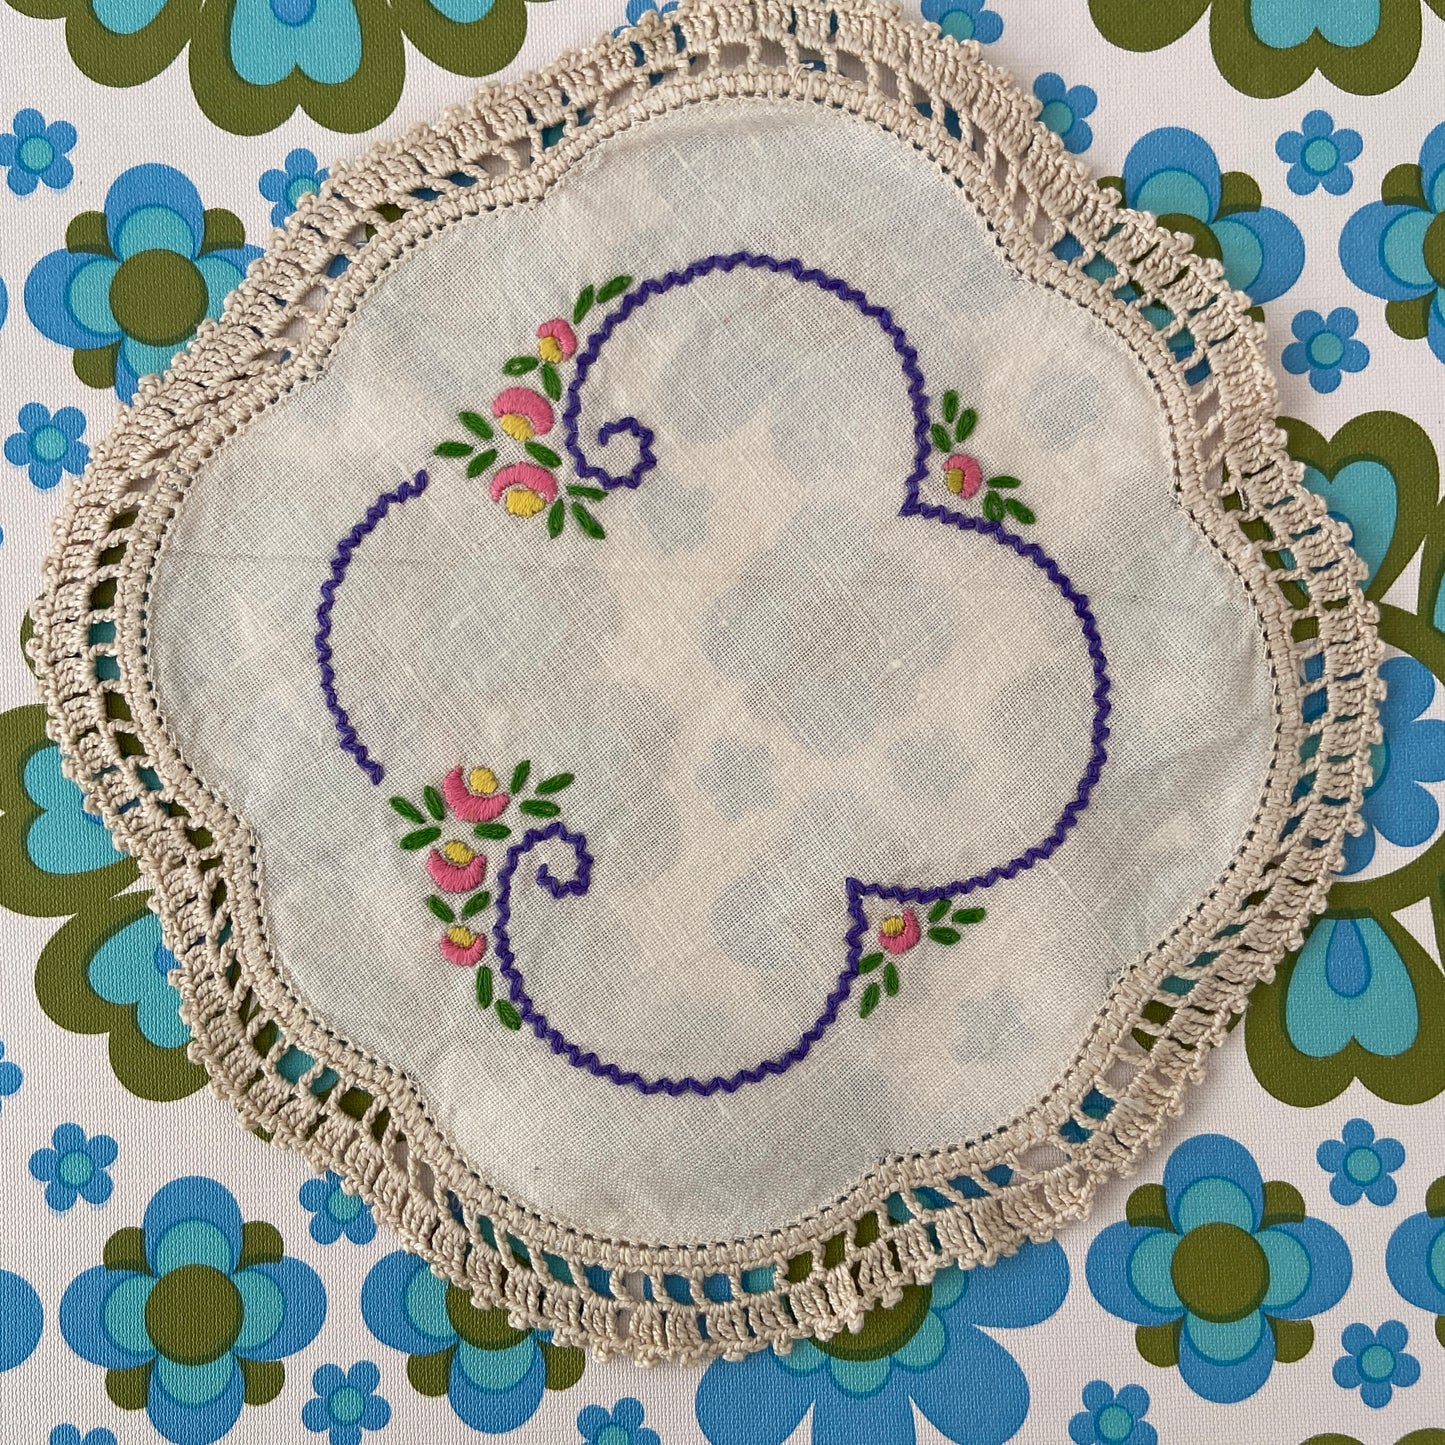 Vintage Crocheted & Embroidered Floral Doily ADORABLE Cute Sweet